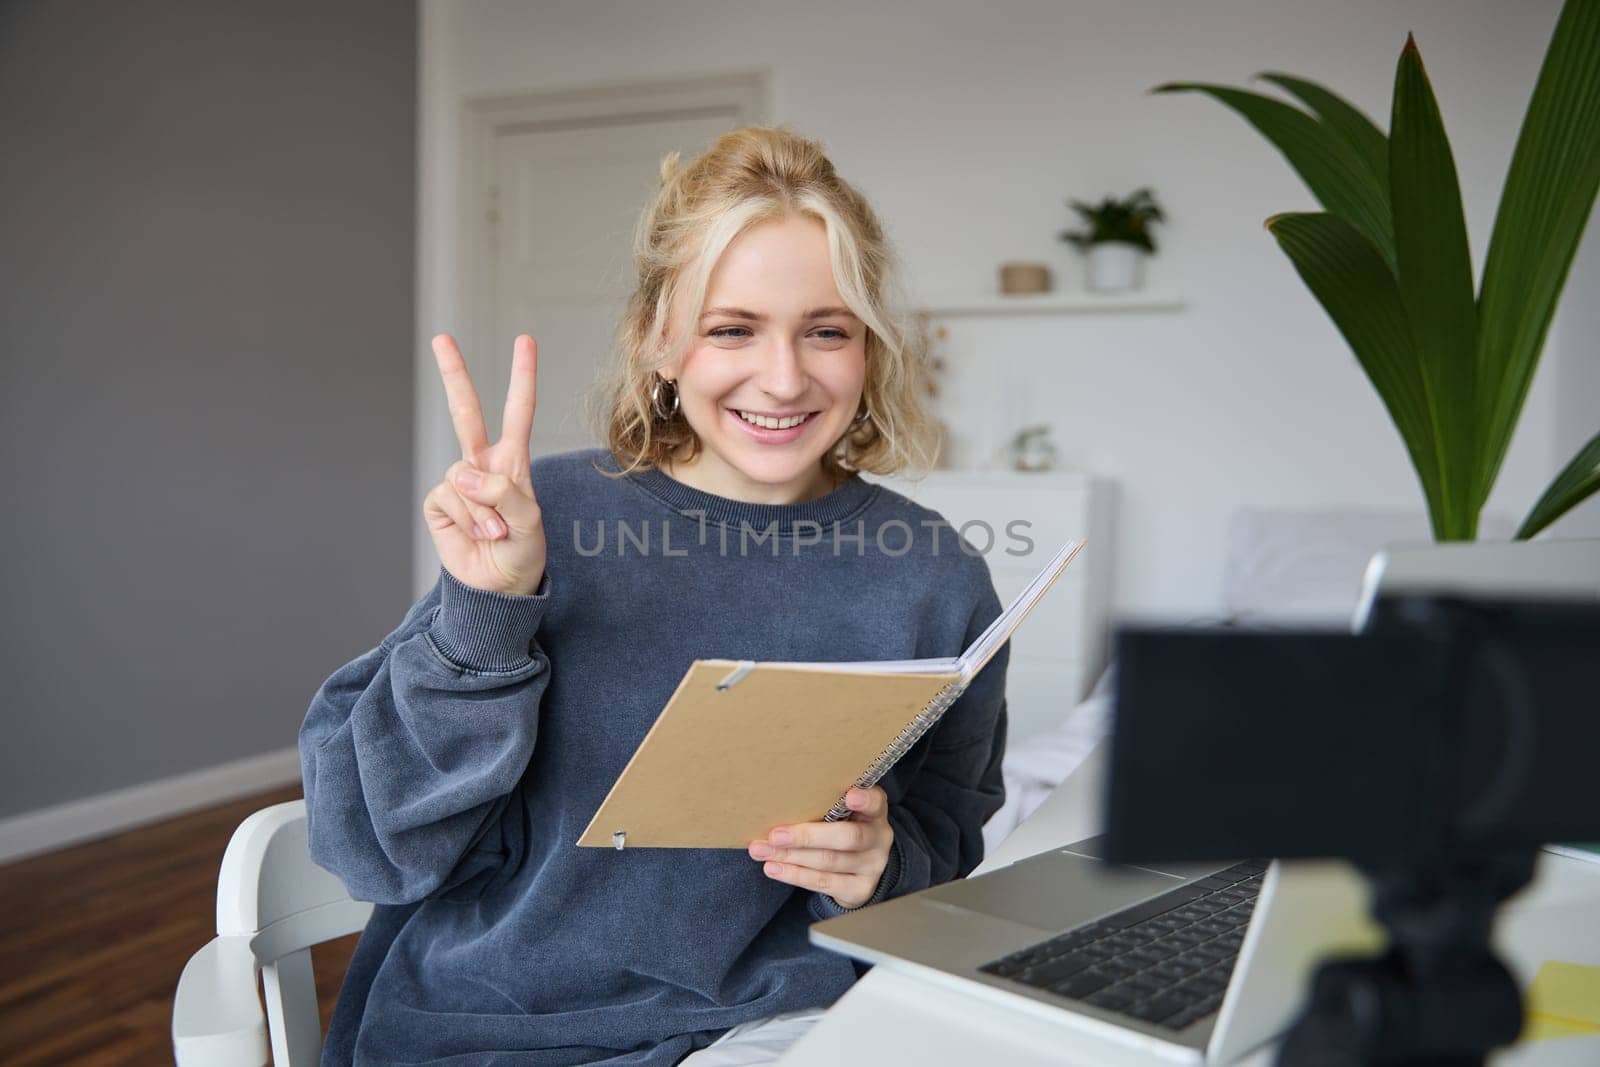 Image of smiling girl records video of herself on digital camera, shows peace sign, sits in front of laptop, holds notebook.